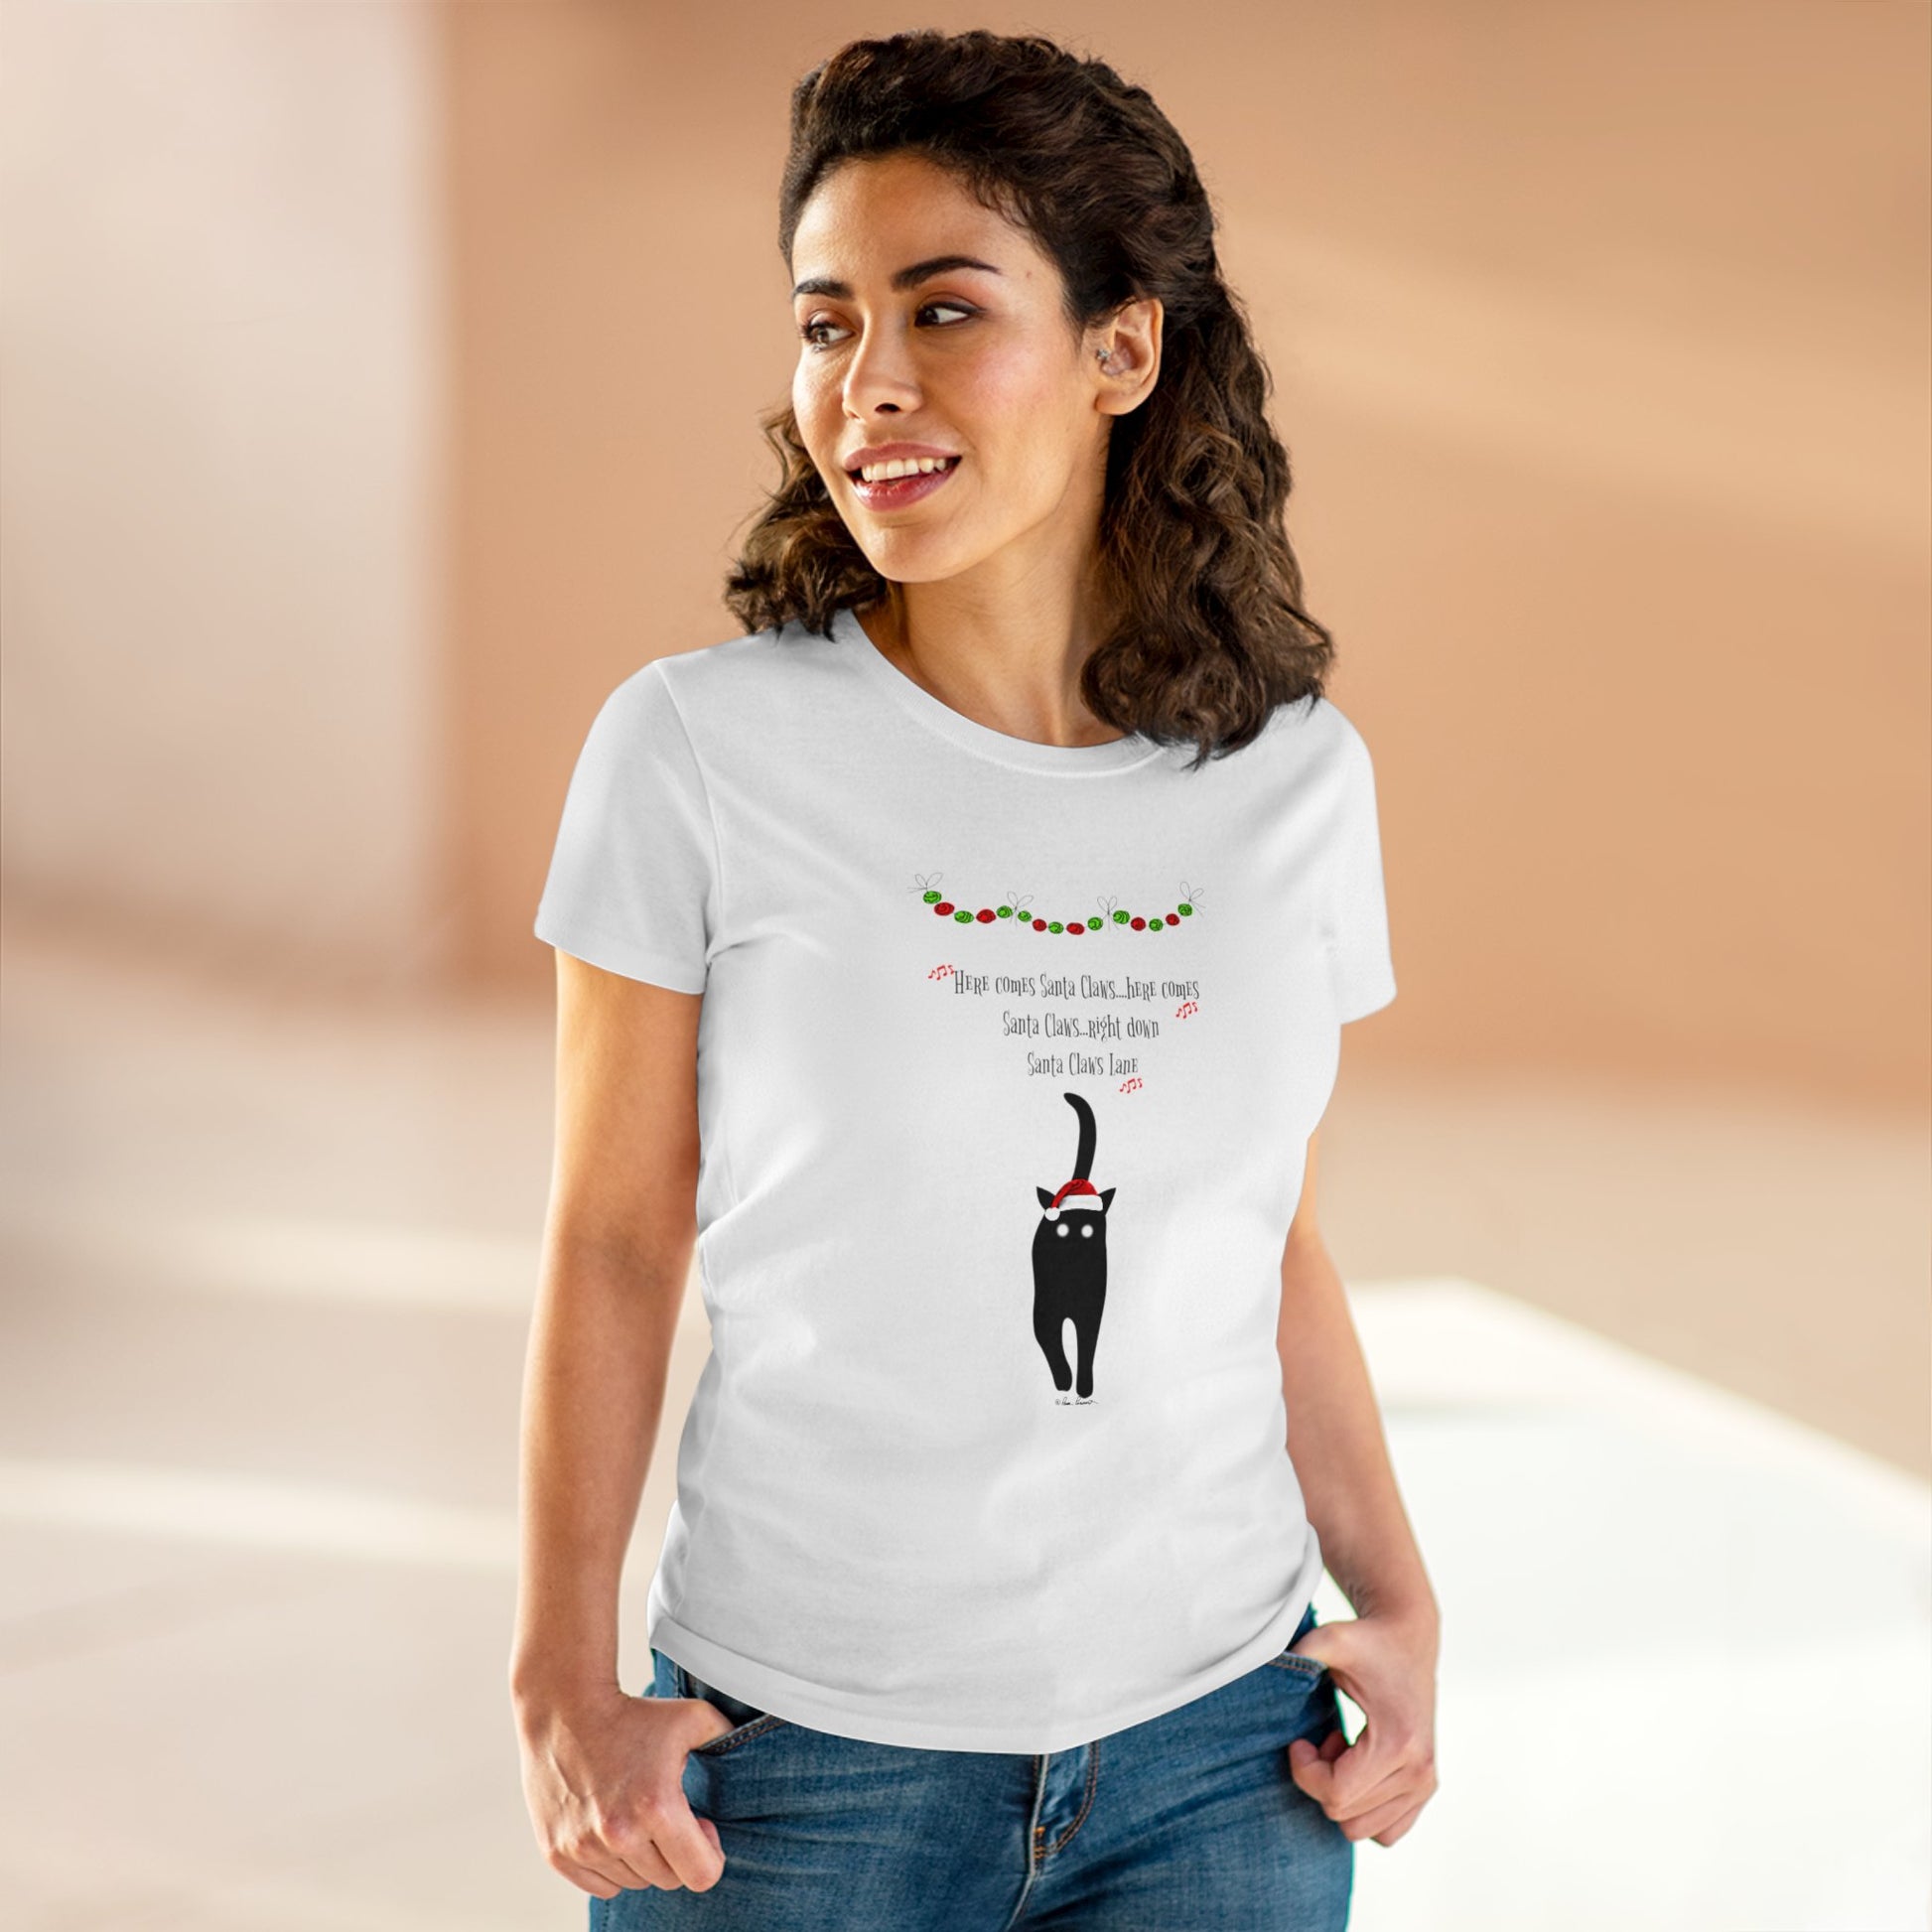 Mock up of the White t-shirt on a woman